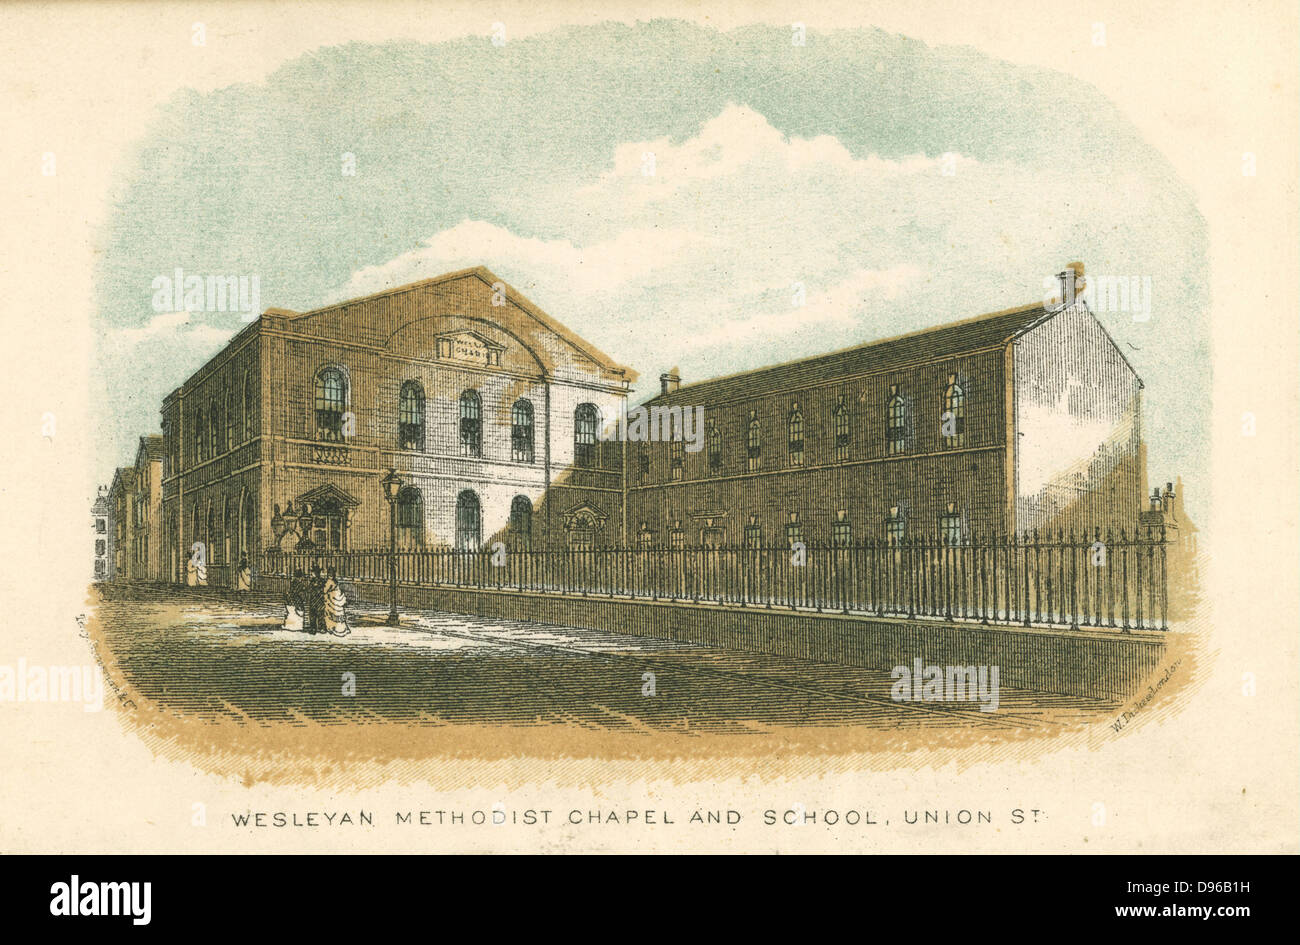 Rochdale, Lancashire, England. Wesleyan Methodist Chapel and School, Union Street. From William Robertson 'Rochdale Past and Present', Rochdale, 1876. Colour-printed engraving. Stock Photo